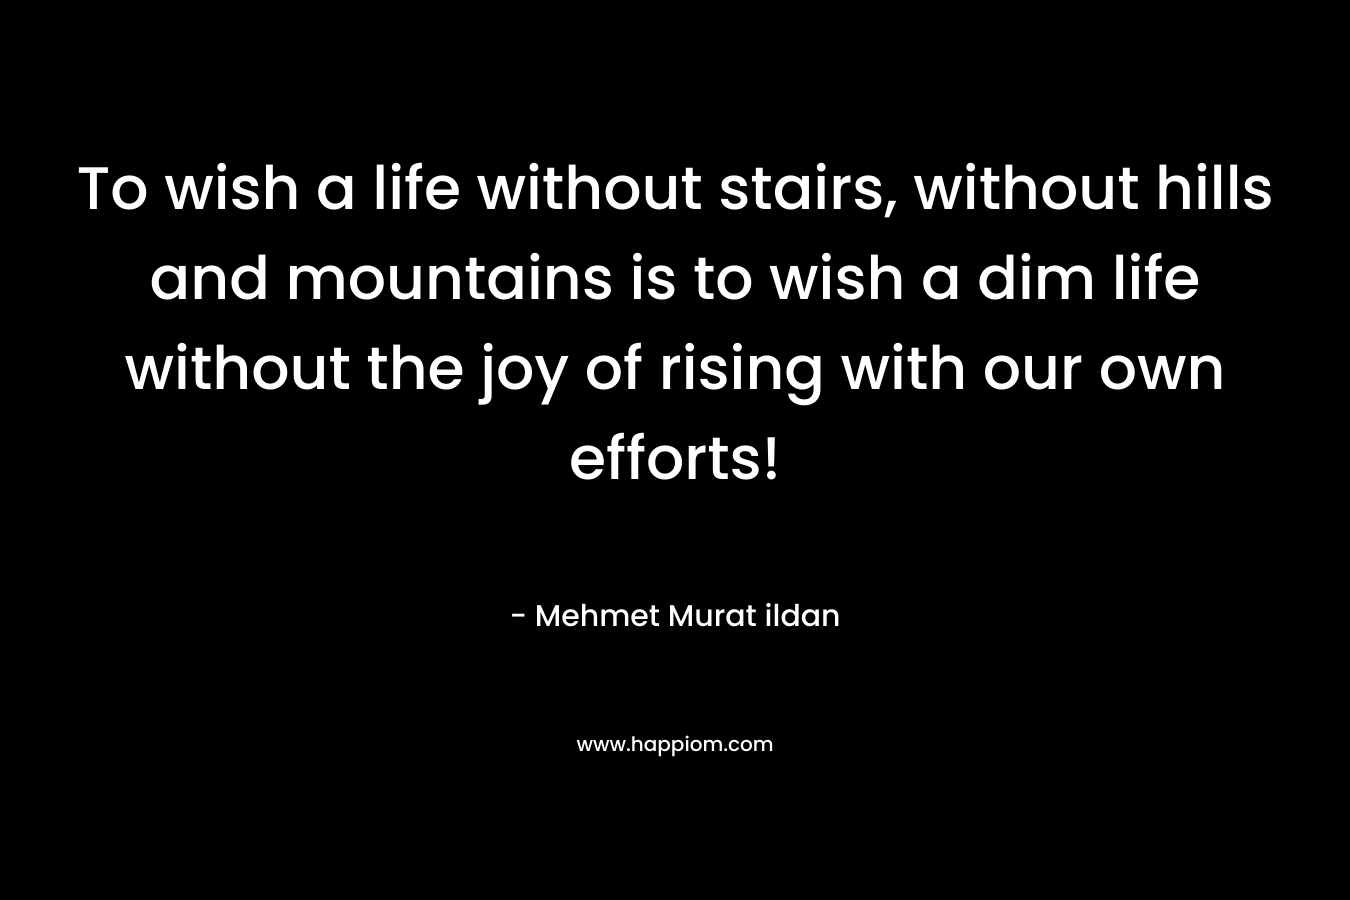 To wish a life without stairs, without hills and mountains is to wish a dim life without the joy of rising with our own efforts!